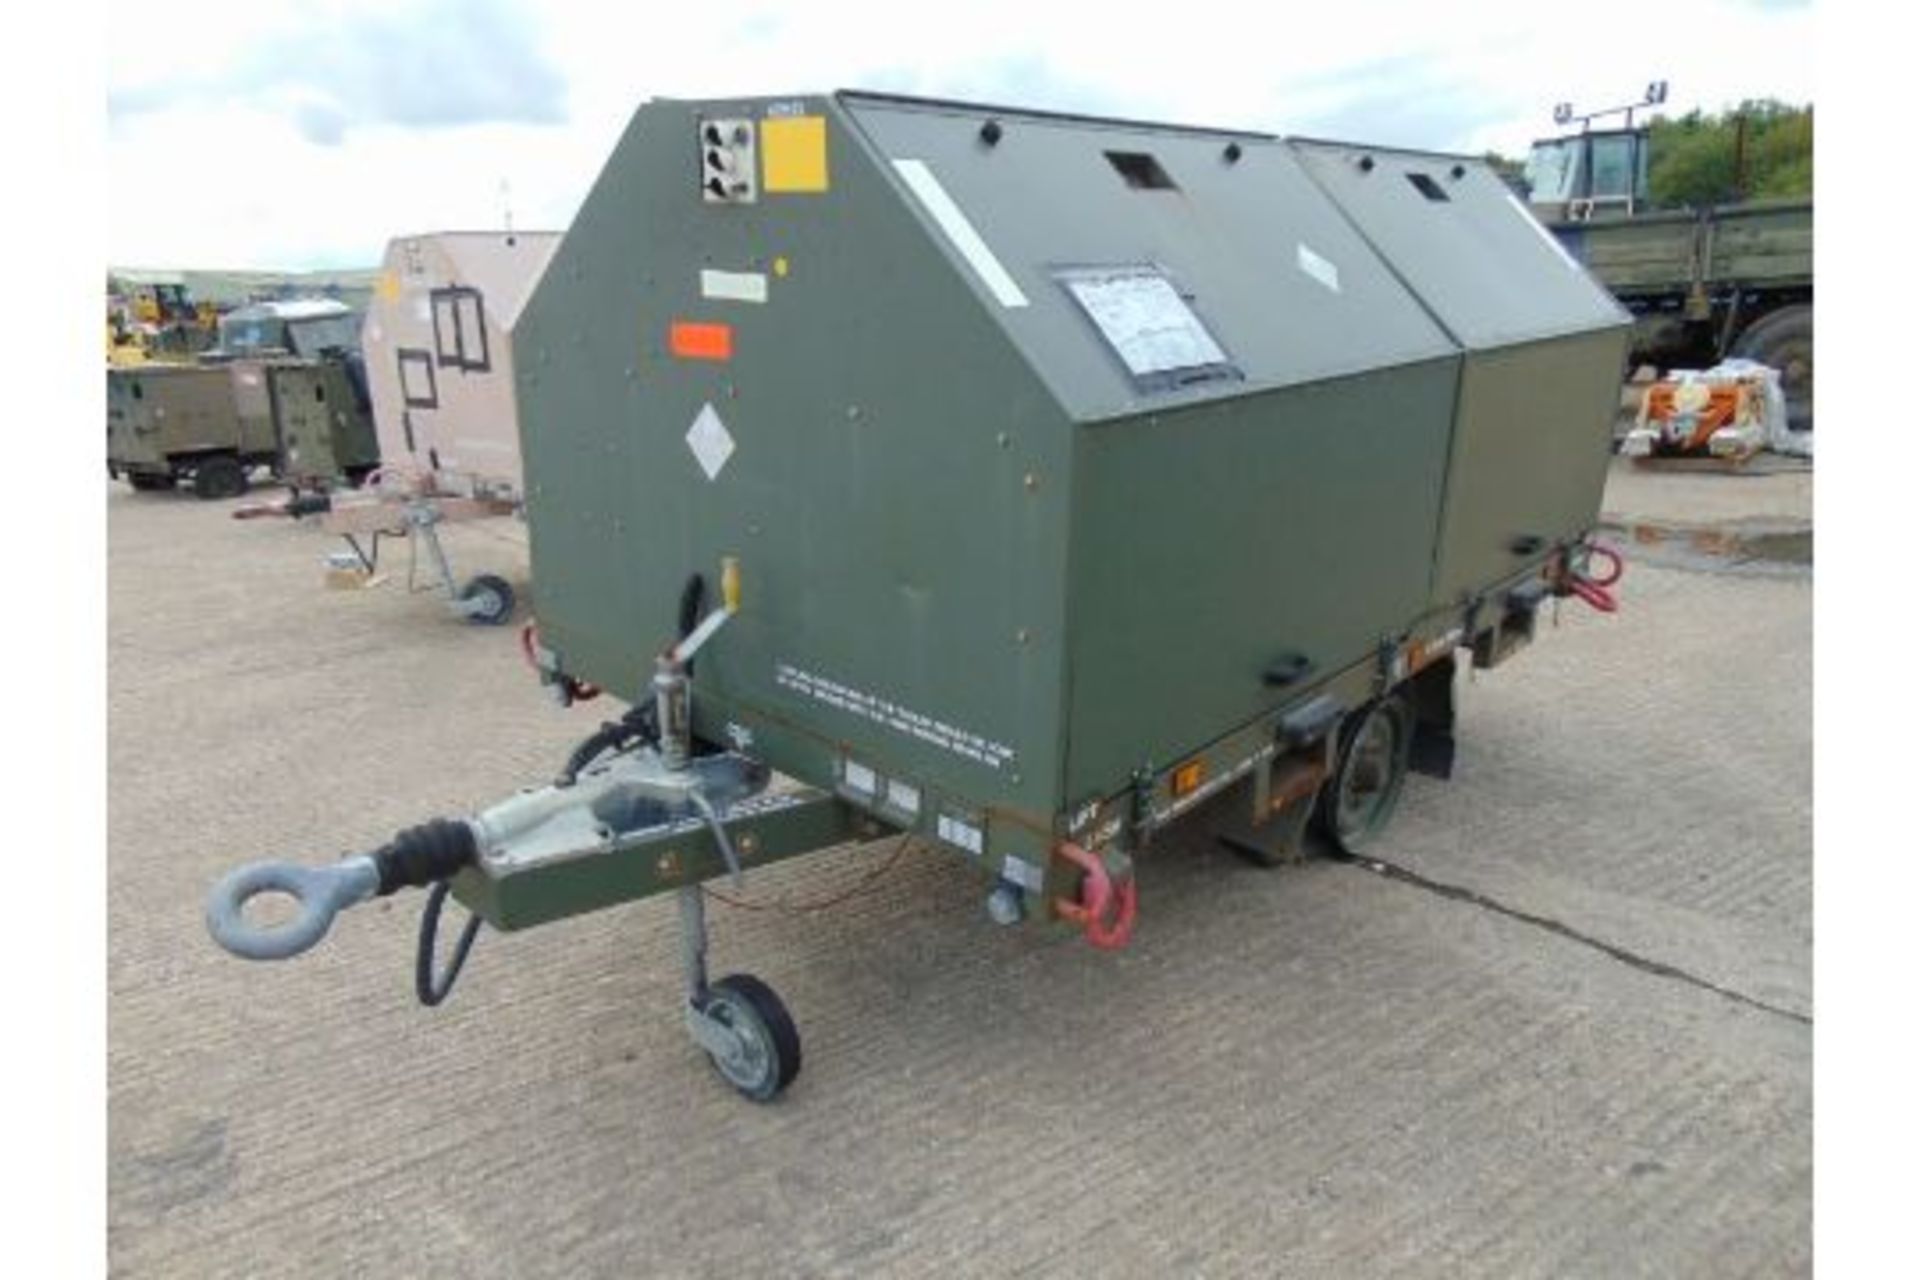 Moskit Single Axle Self Contained Airfield Lighting System c/w 2 x Onboard Generators - Image 3 of 21